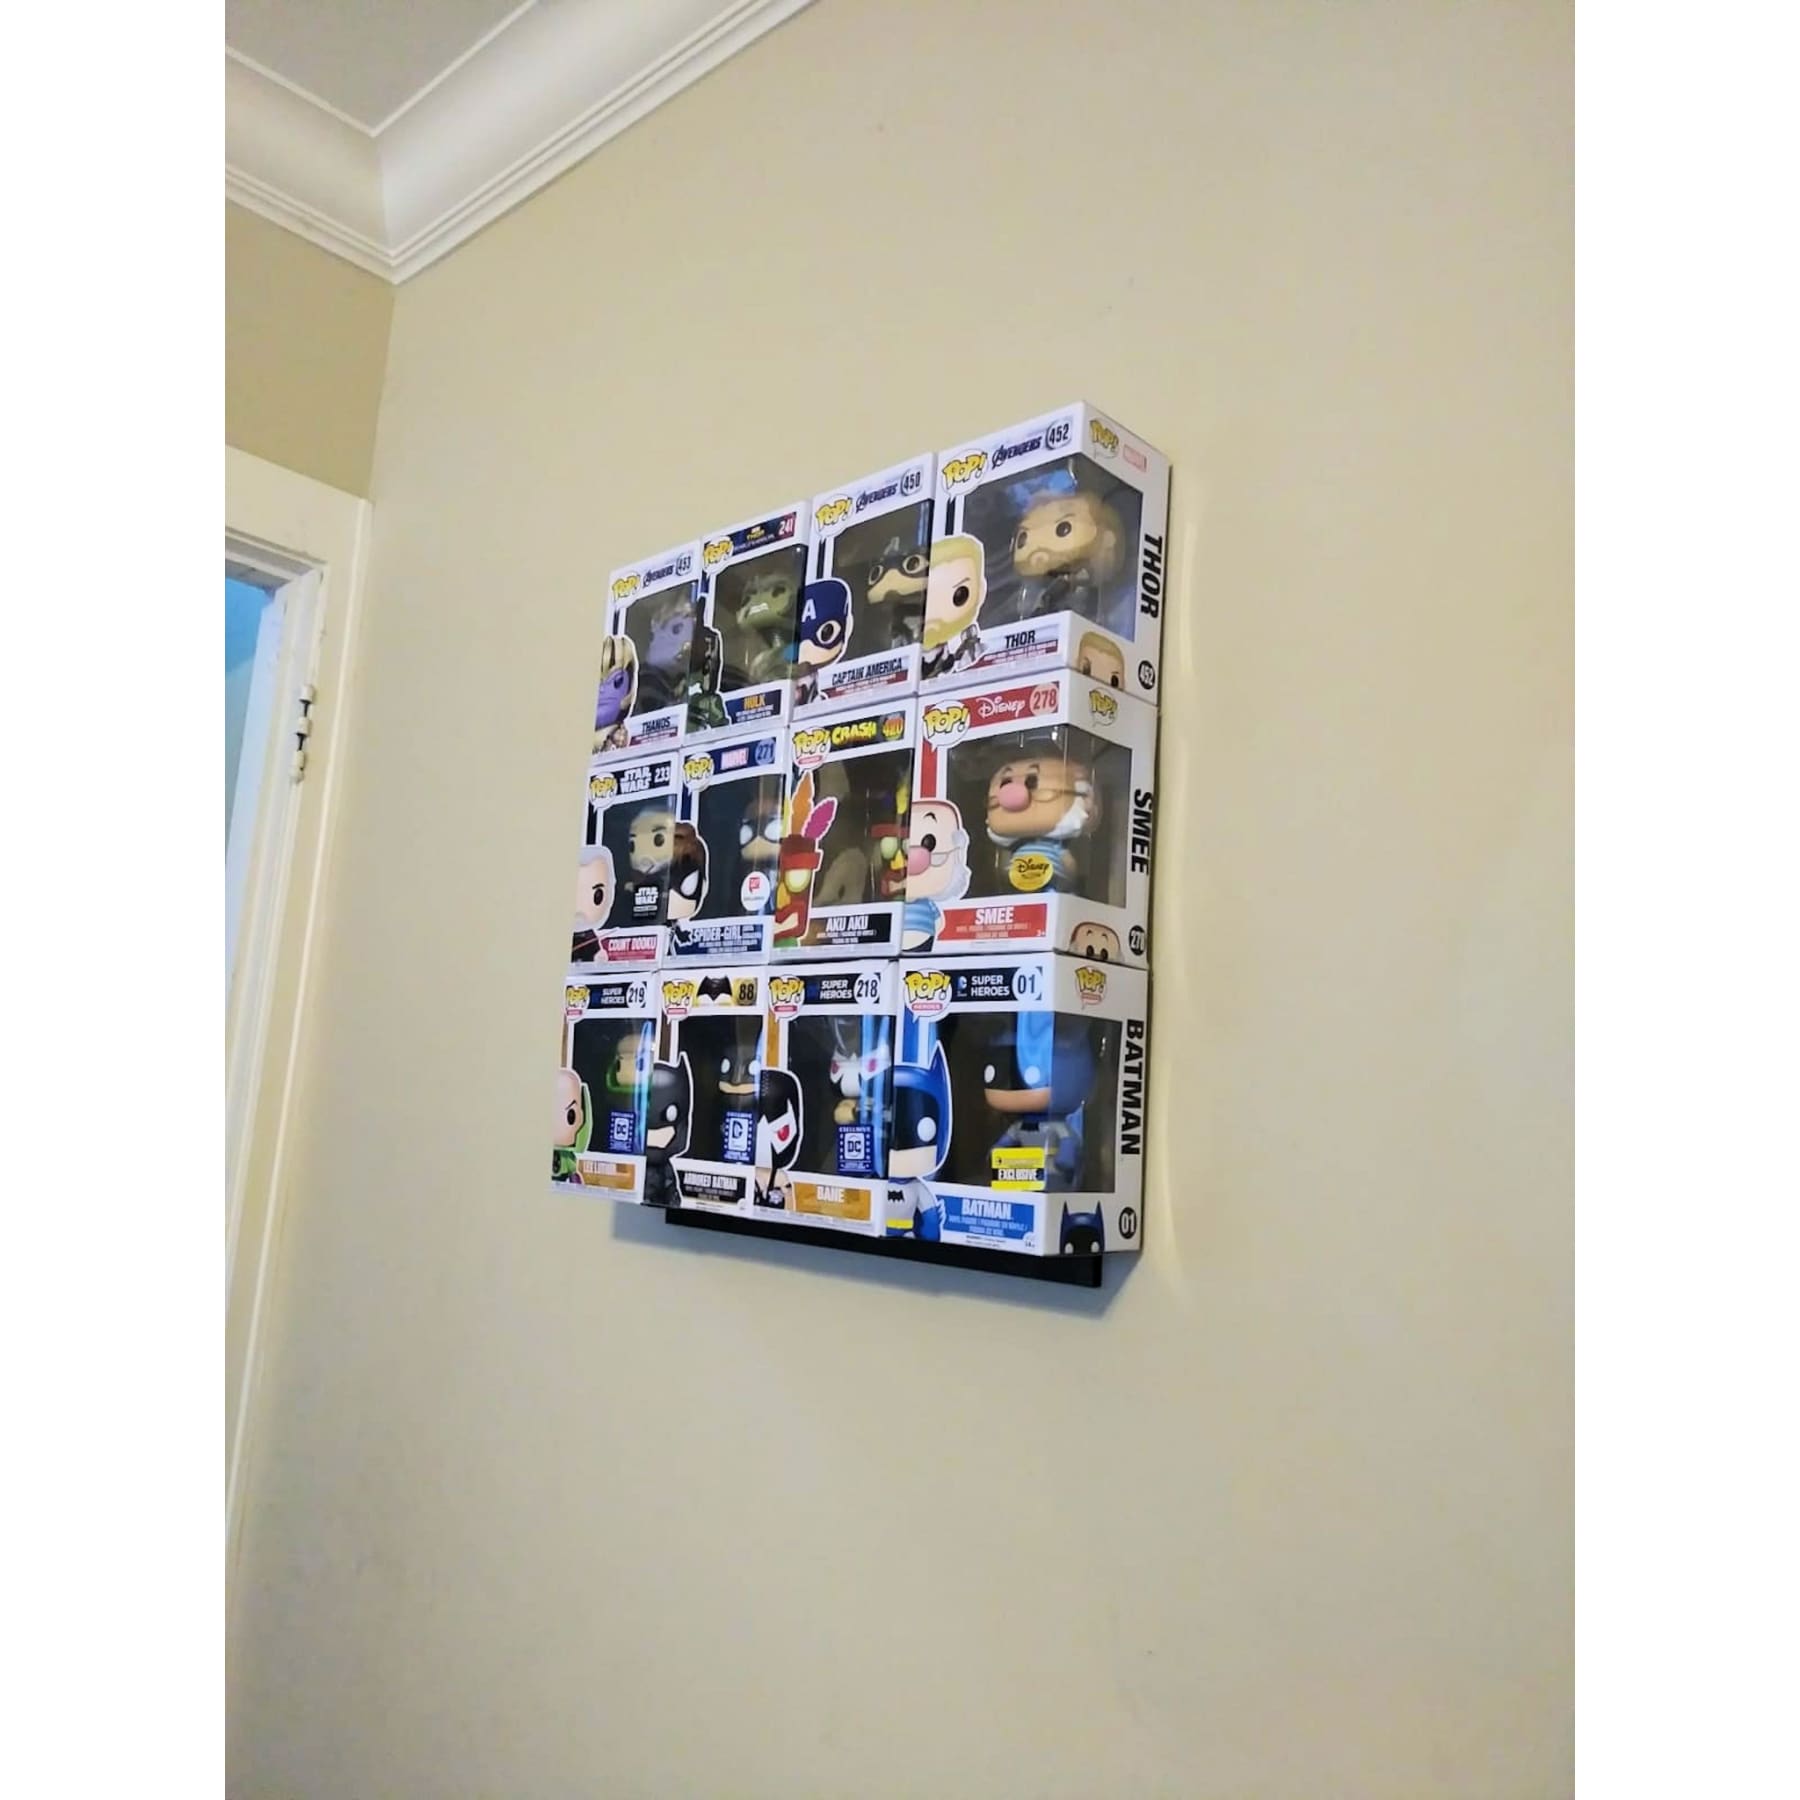 In Box Funko Pop, Wall Display Case, Frameless, Shelfless, No Assembly required, just hang on